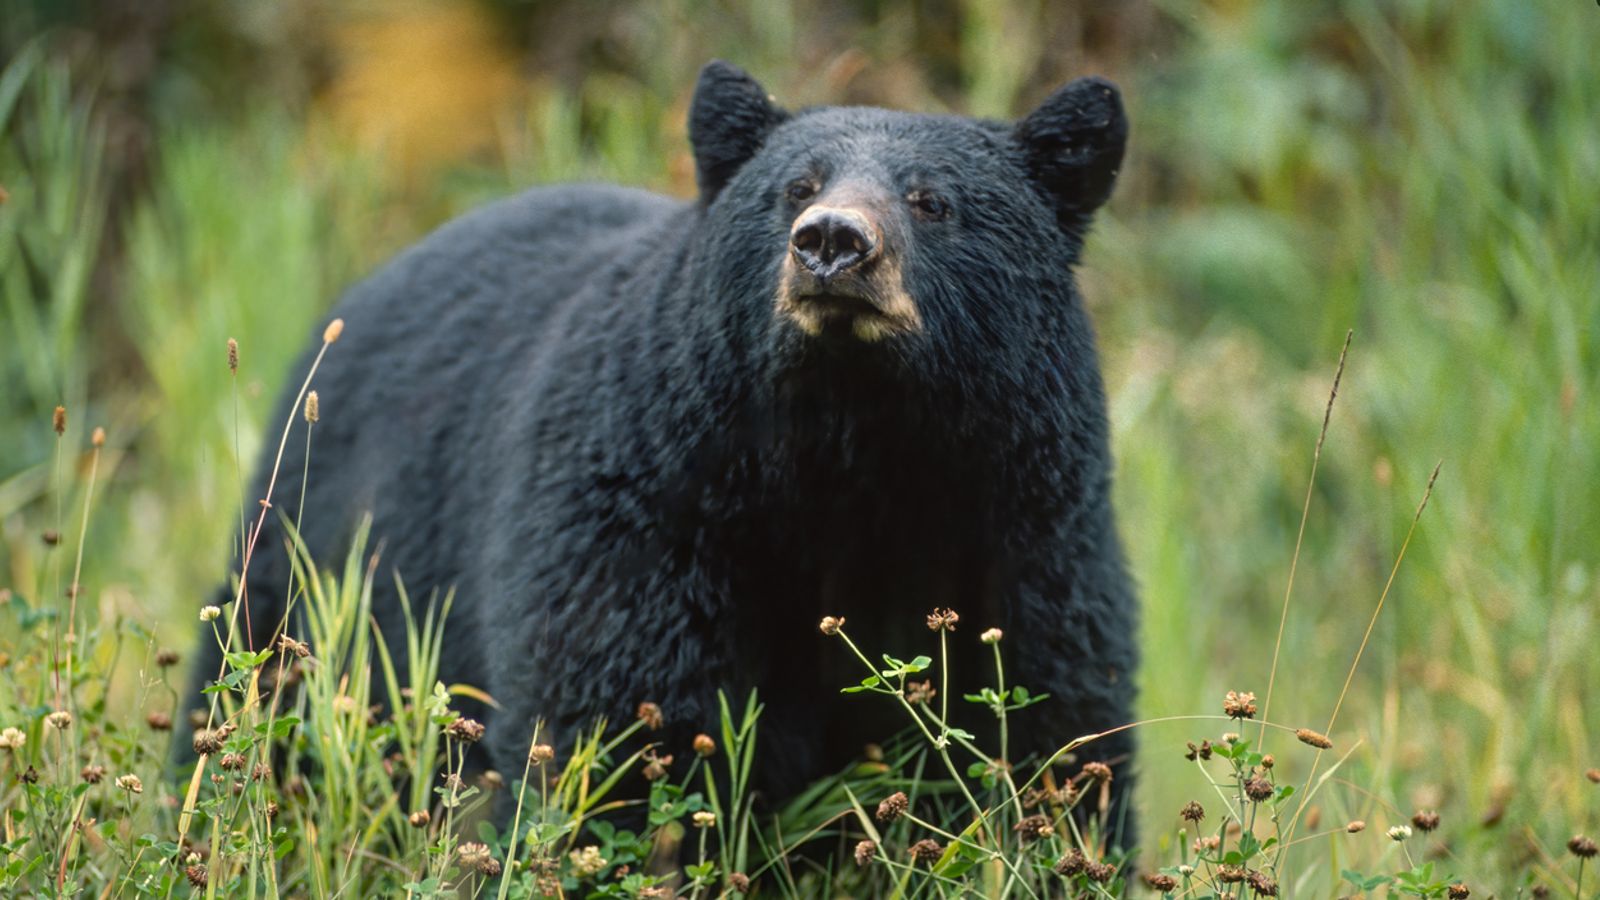 Arizona teenager saved by brother after black bear attack